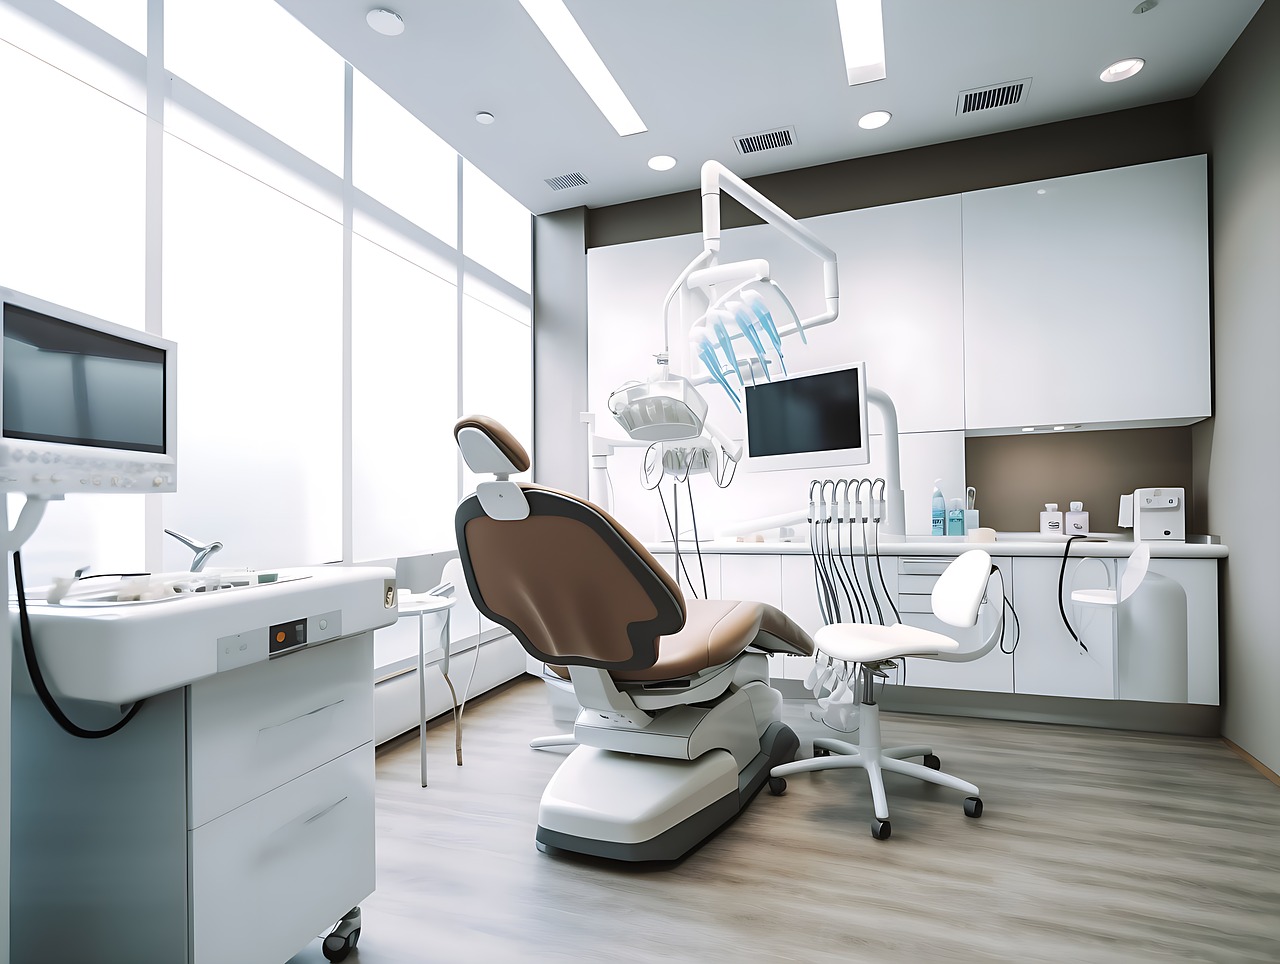 Dental Anxiety: Overcoming Fear and Finding Comfort at the Dentist